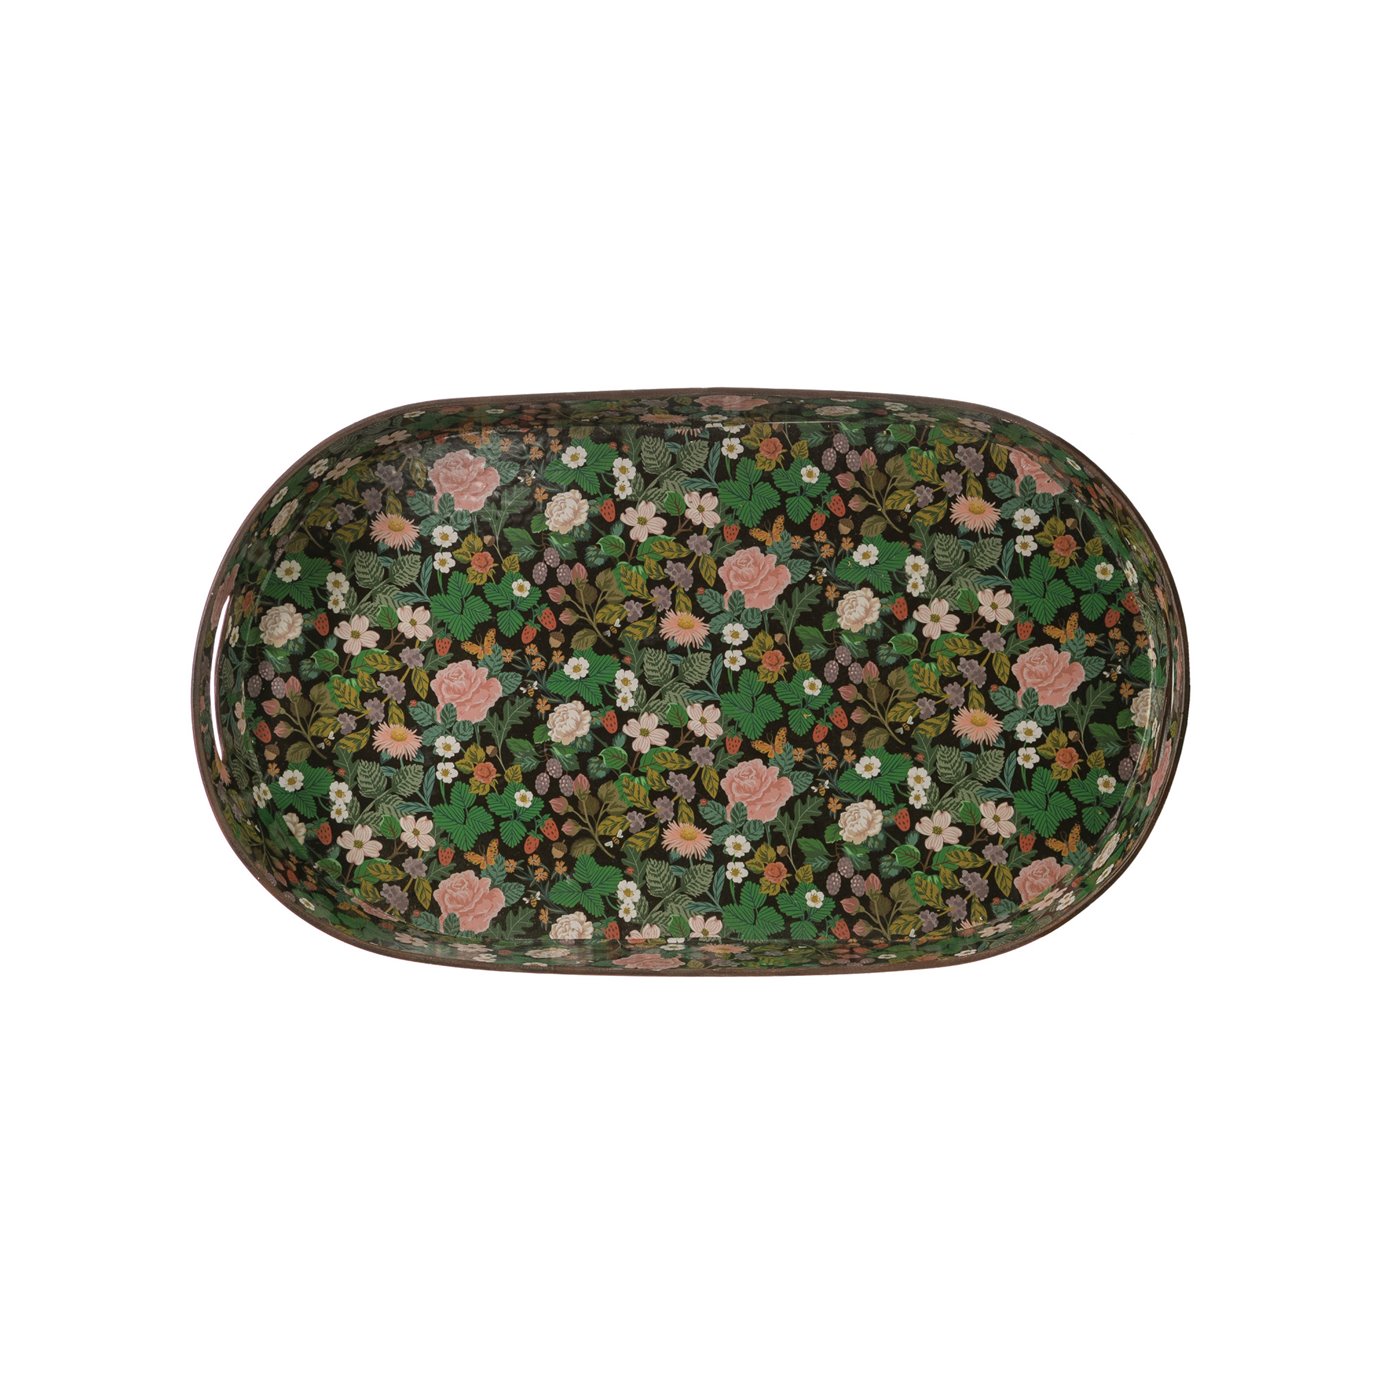 Decorative Metal Oval Tray with Floral Design & Cut-out Handles